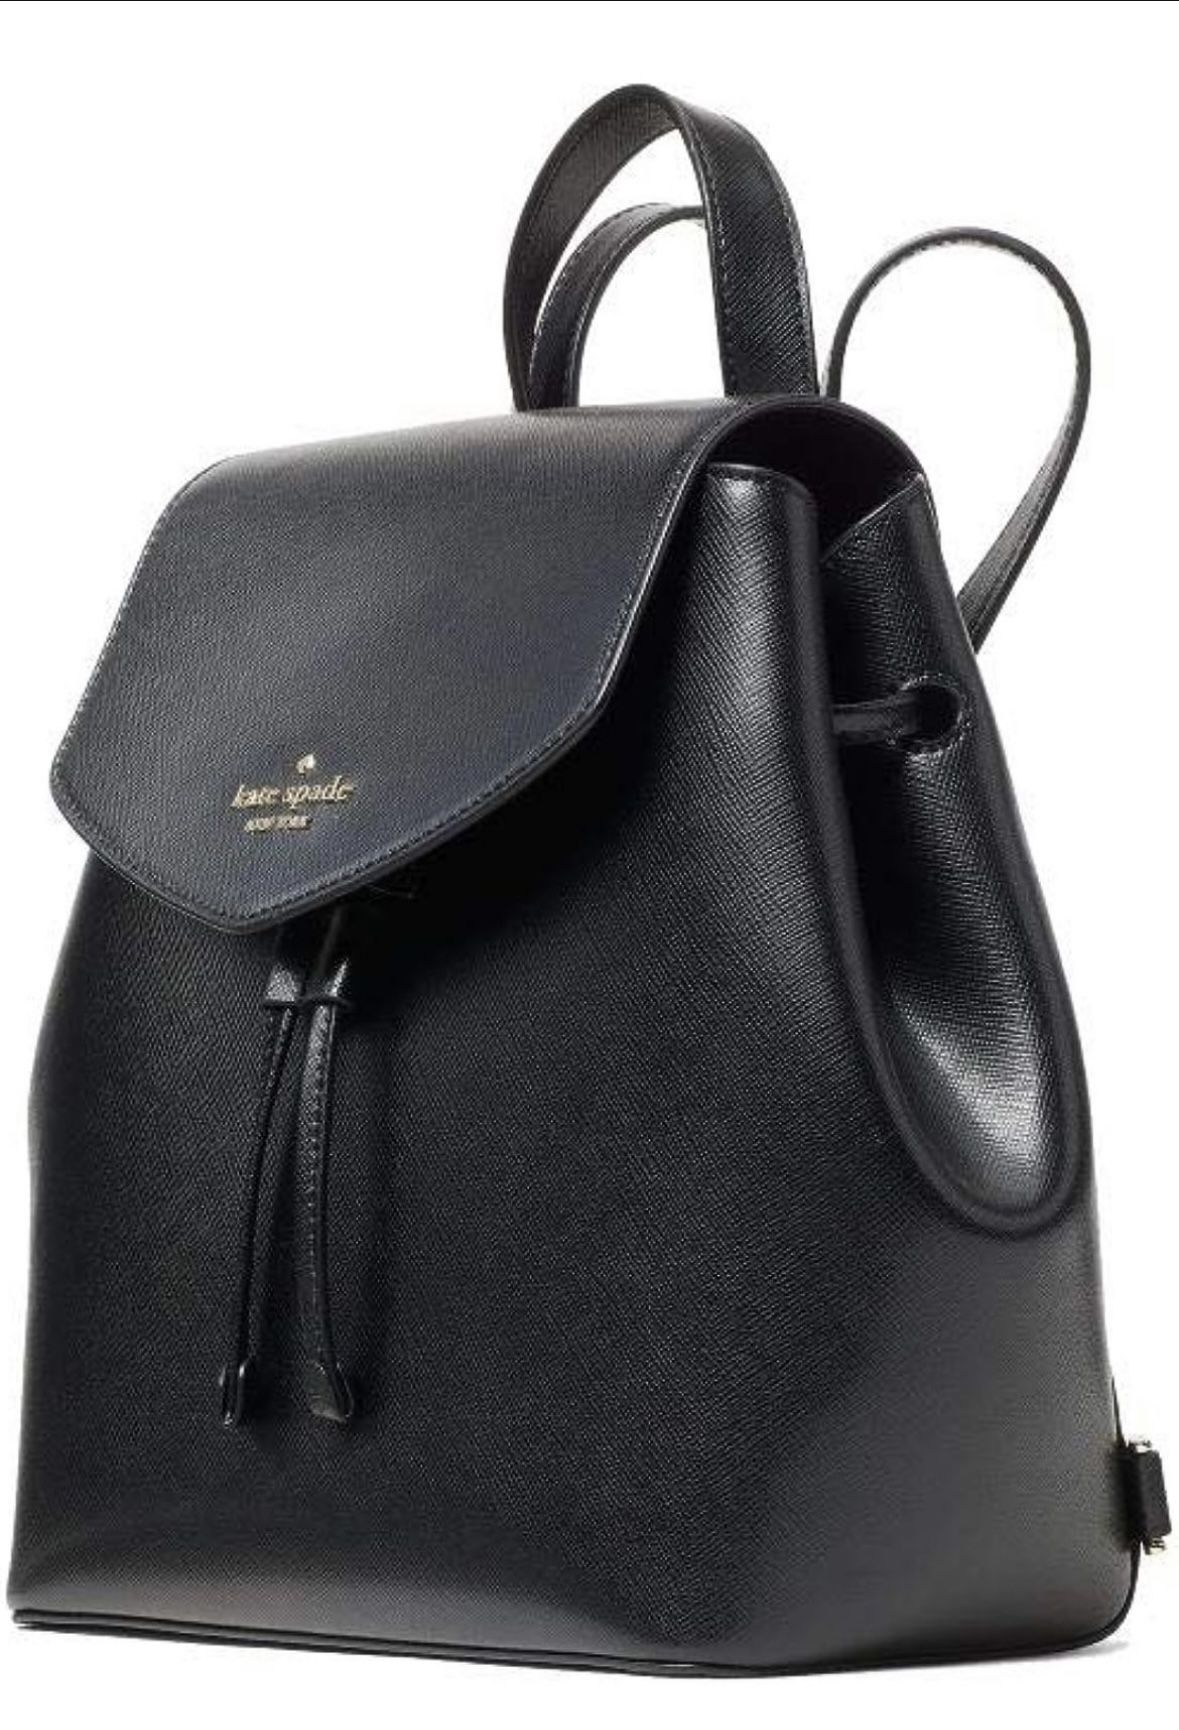 Kate Spade Lizzie Black Leather Backpack Purse